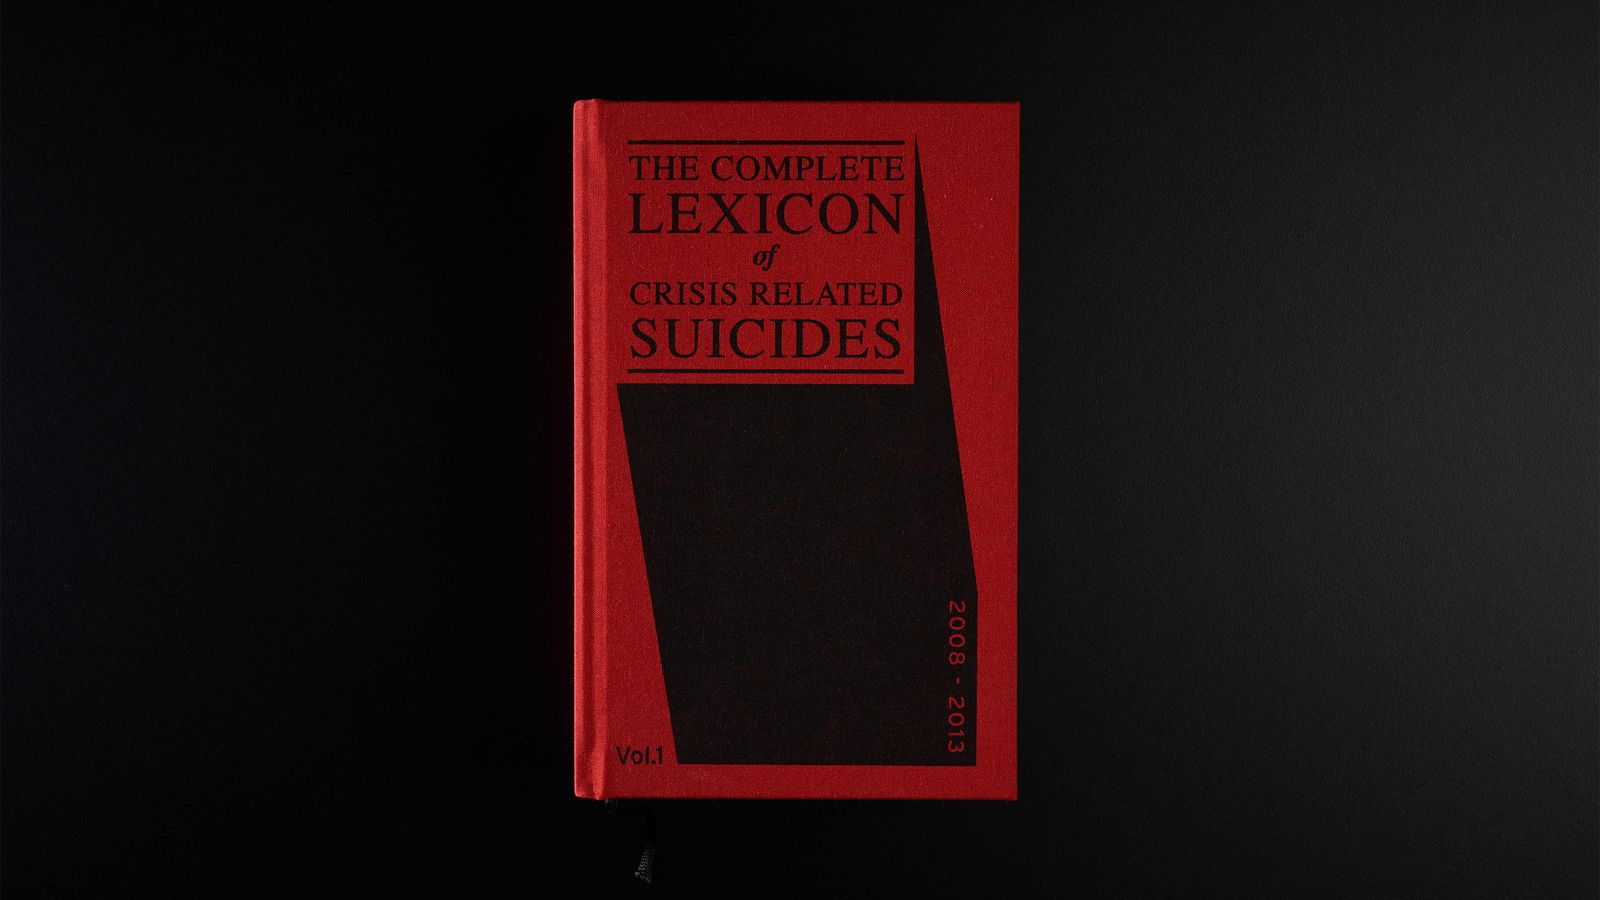 The complete lexicon of crisis related suicides - Cover.jpg